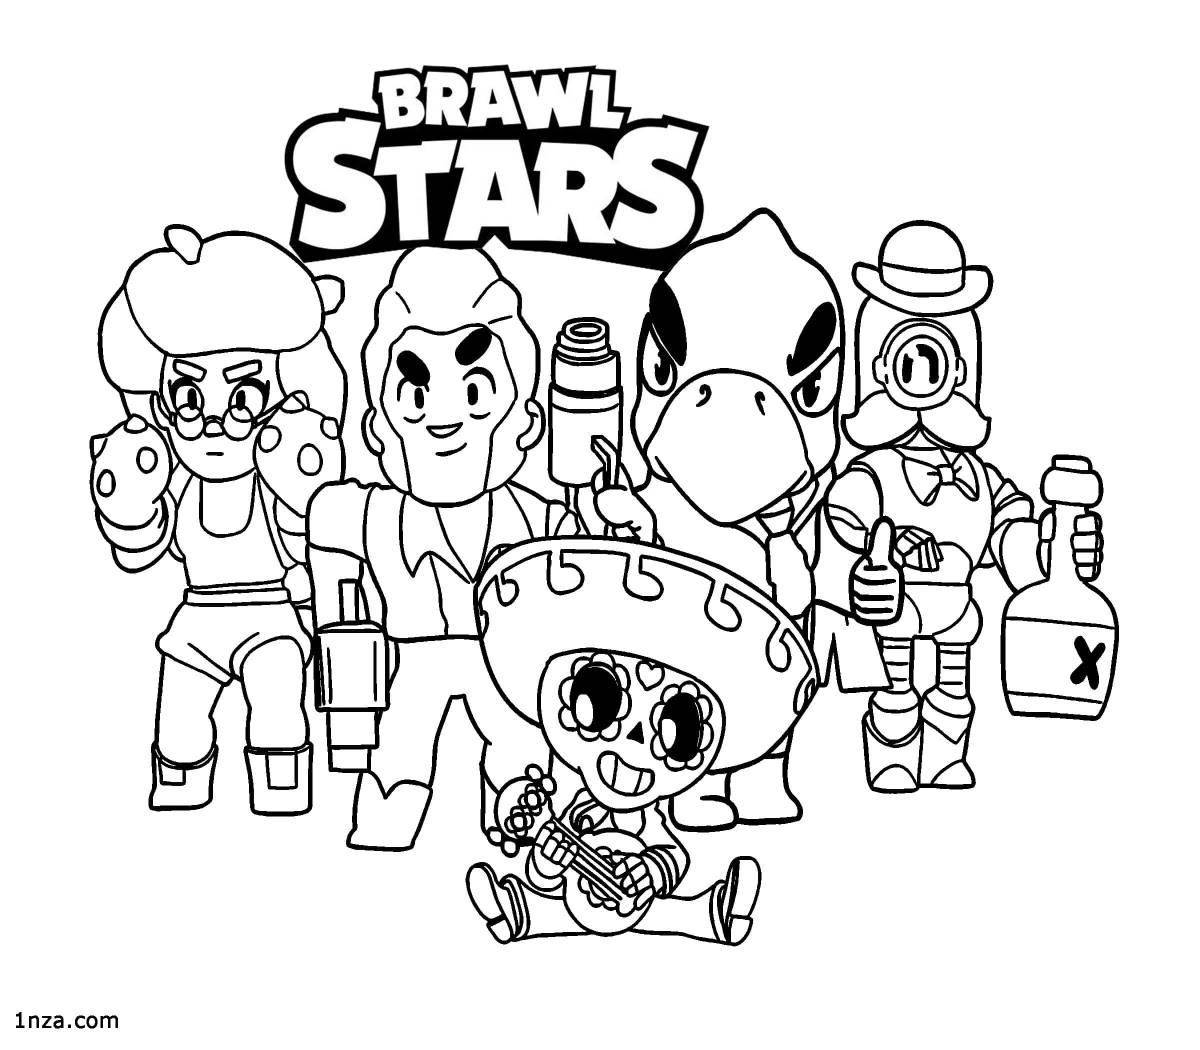 Adorable braver stars coloring page